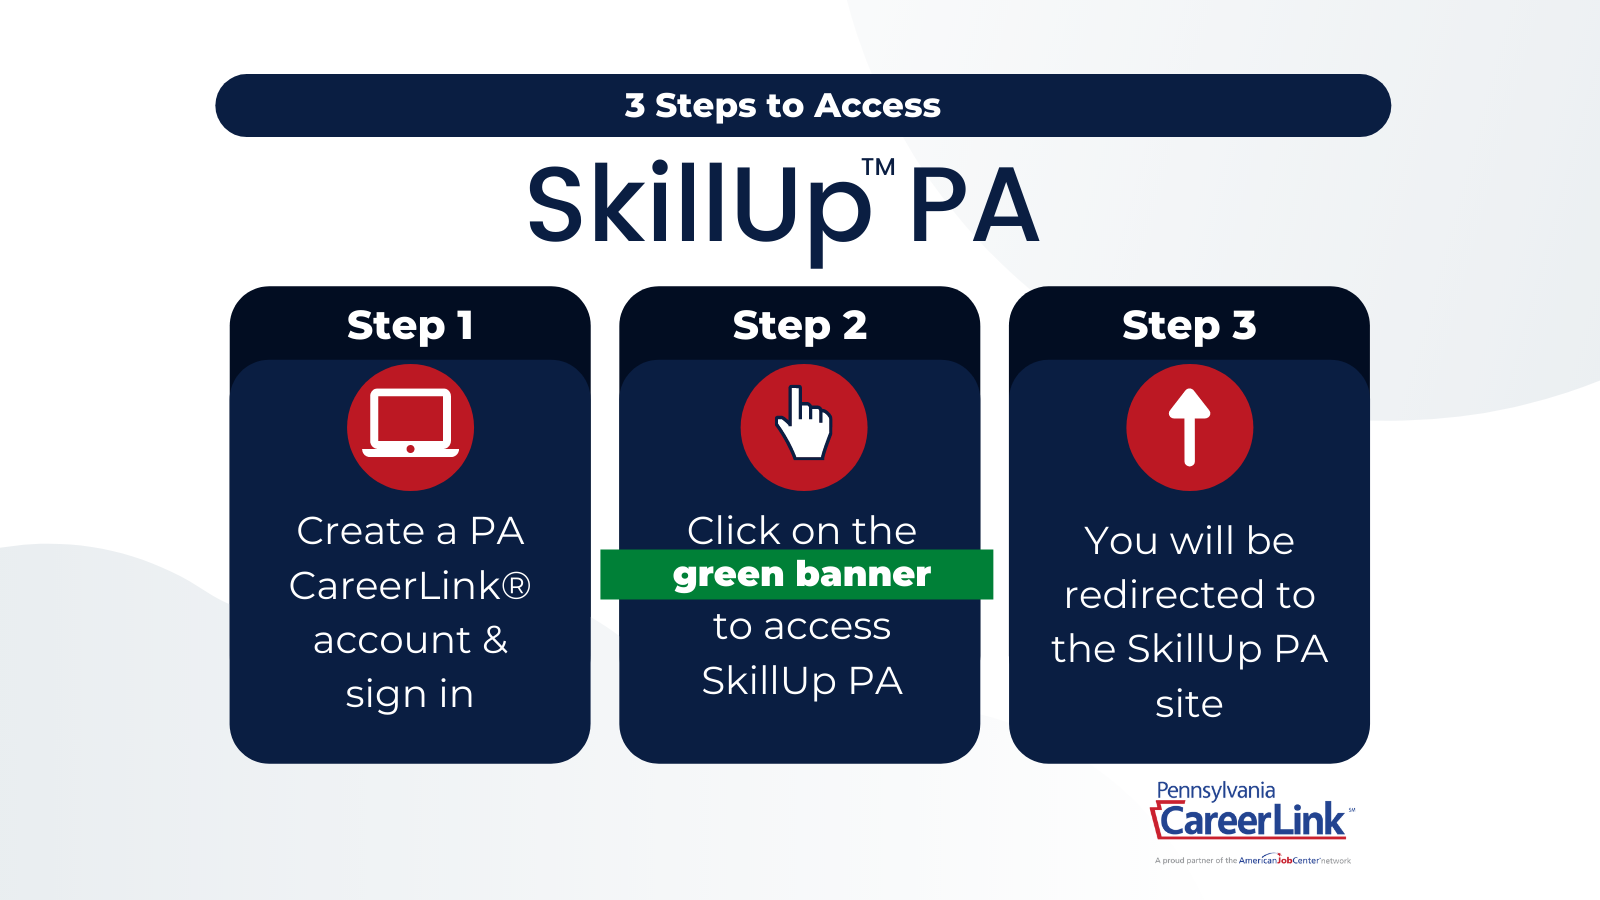 Steps to sign-up for SkillUp PA (Twitter size)